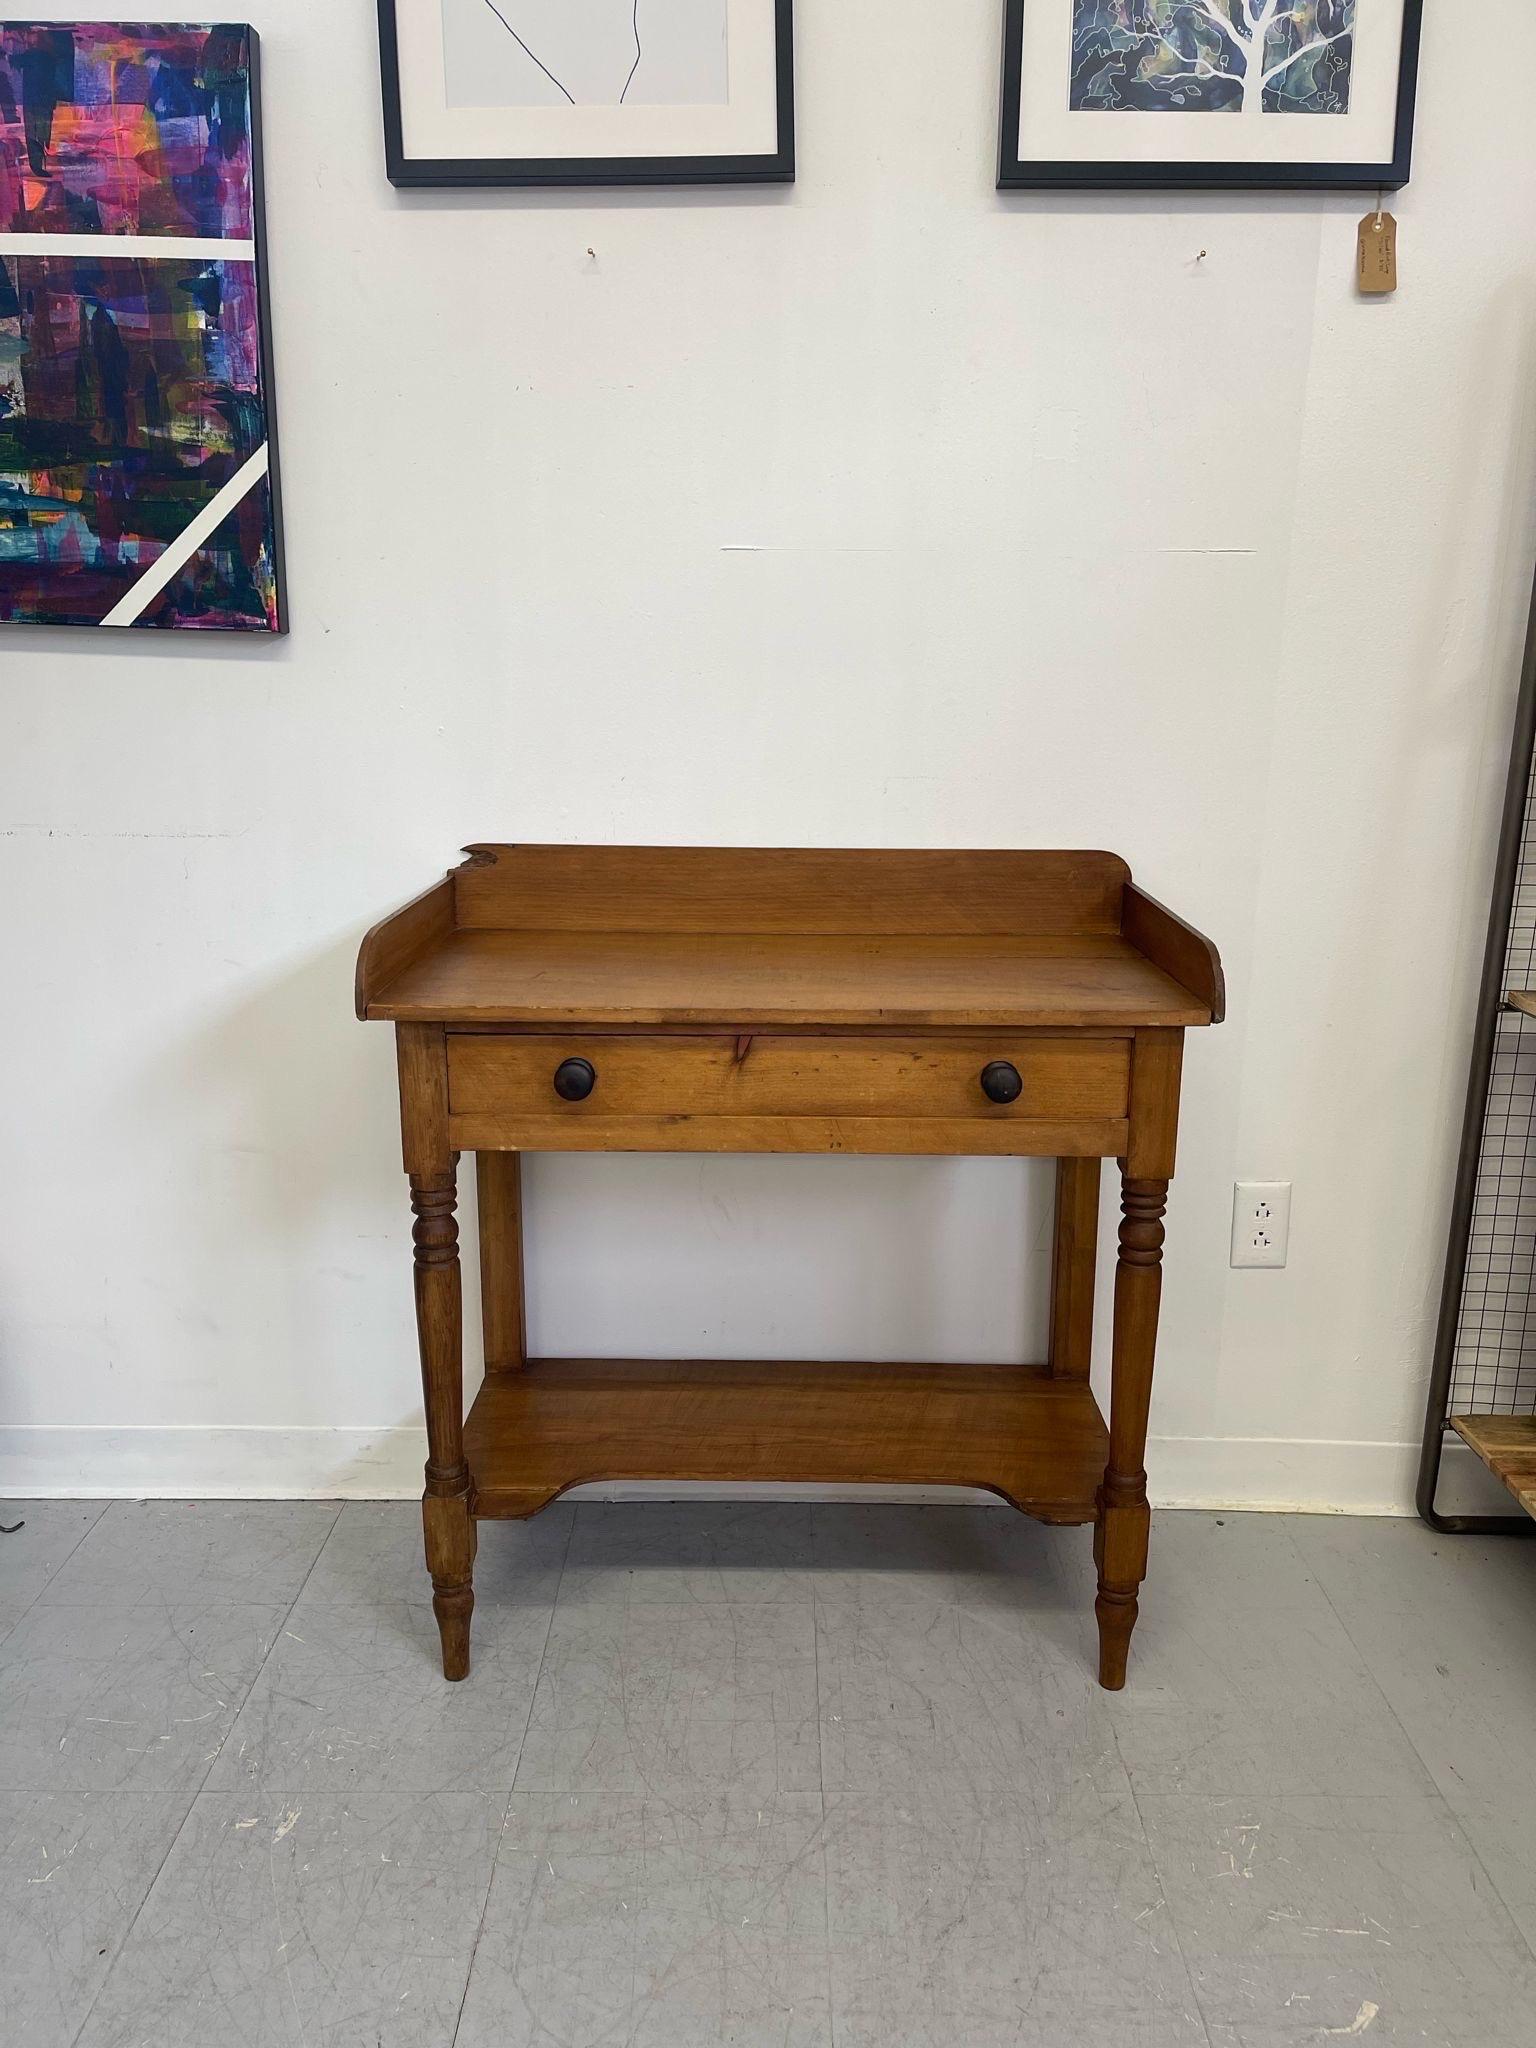 Vintage Early American Style Console Table Washstand In Good Condition For Sale In Seattle, WA